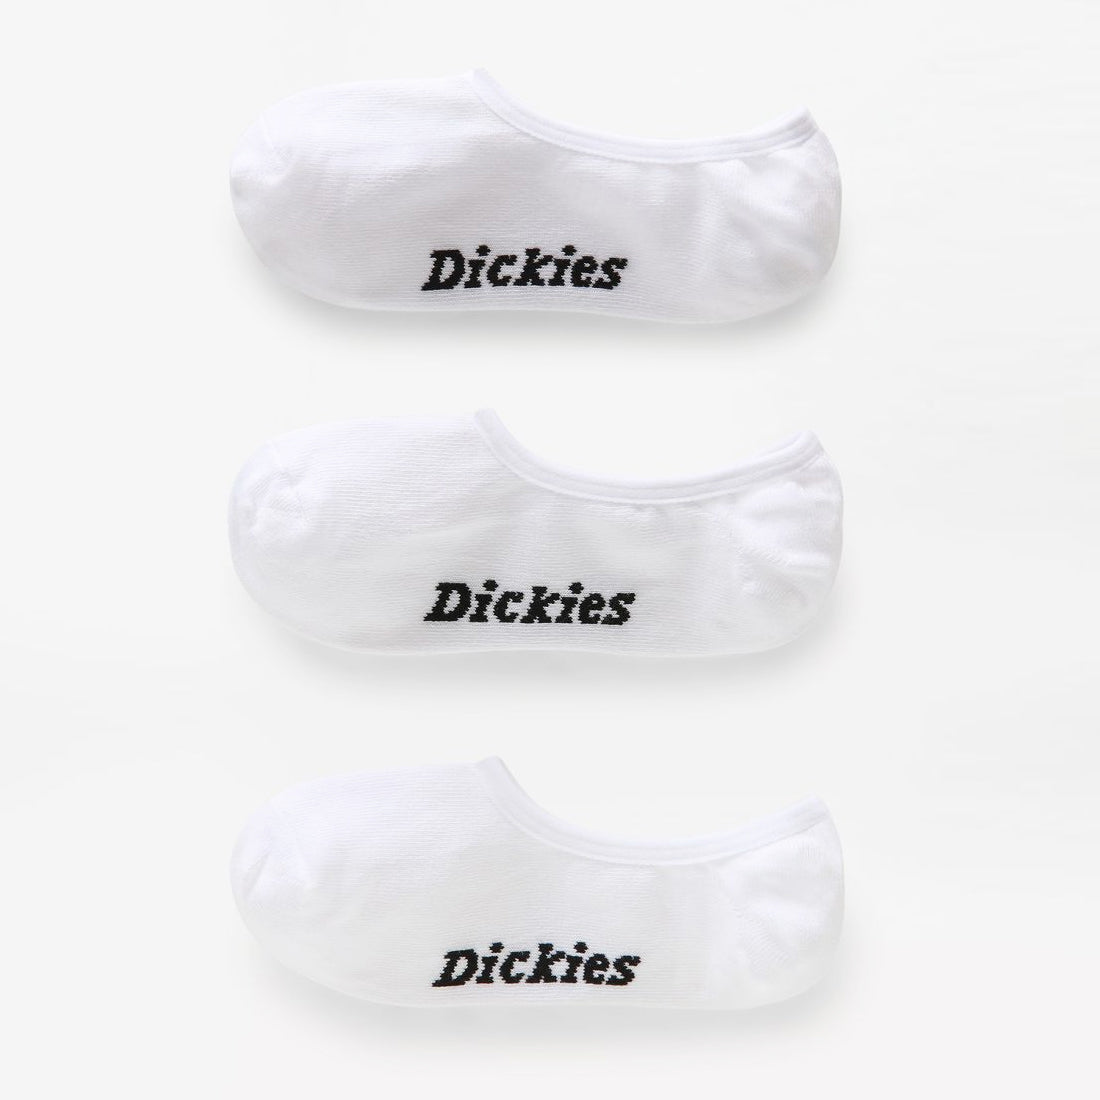 Dickies Invisible Socks white